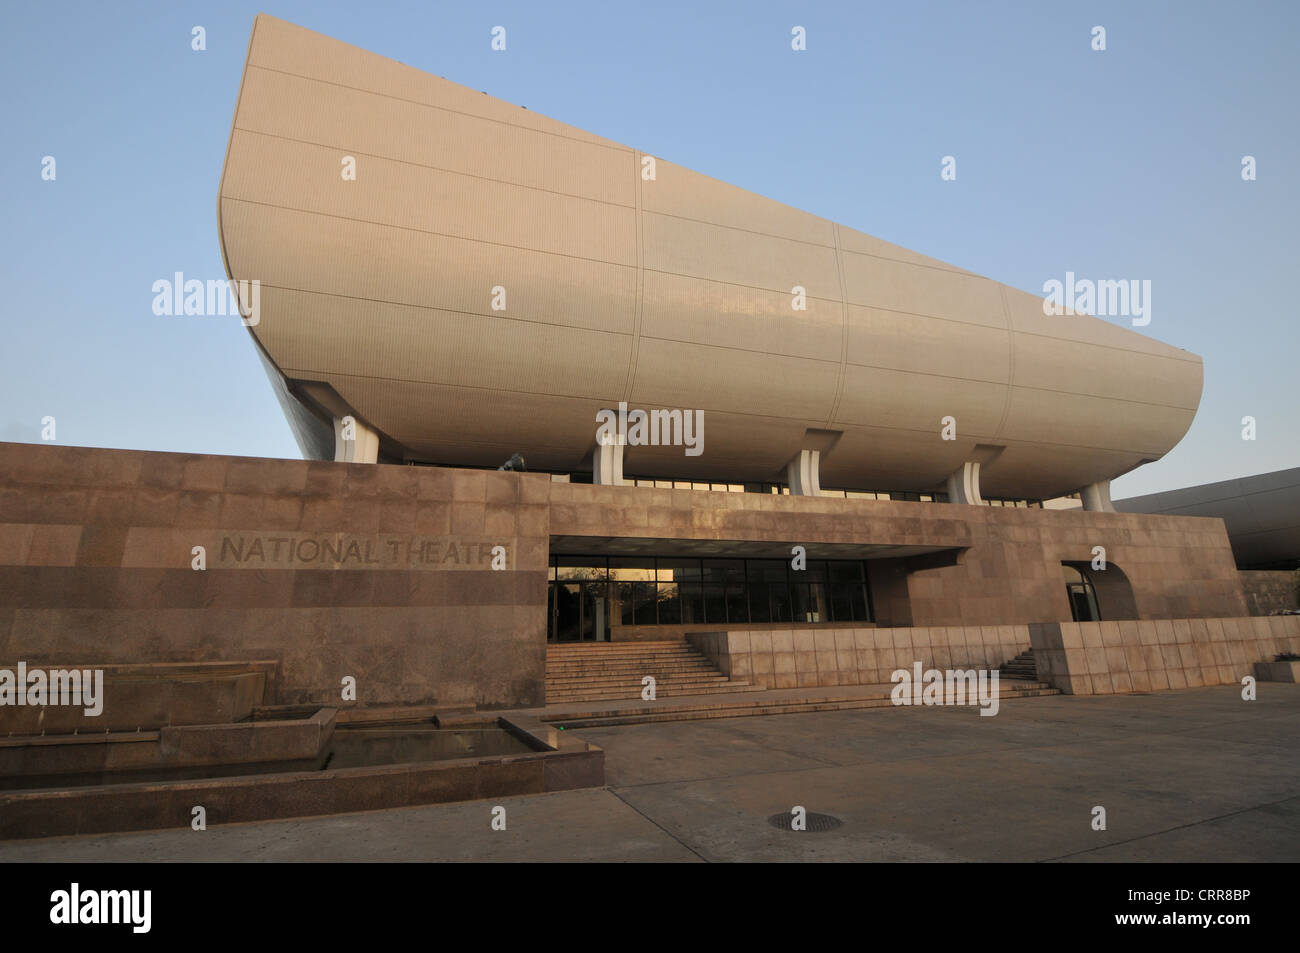 The National Theatre, opened in 1992 and located in the Victoriaborg district of Accra, Ghana. Stock Photo